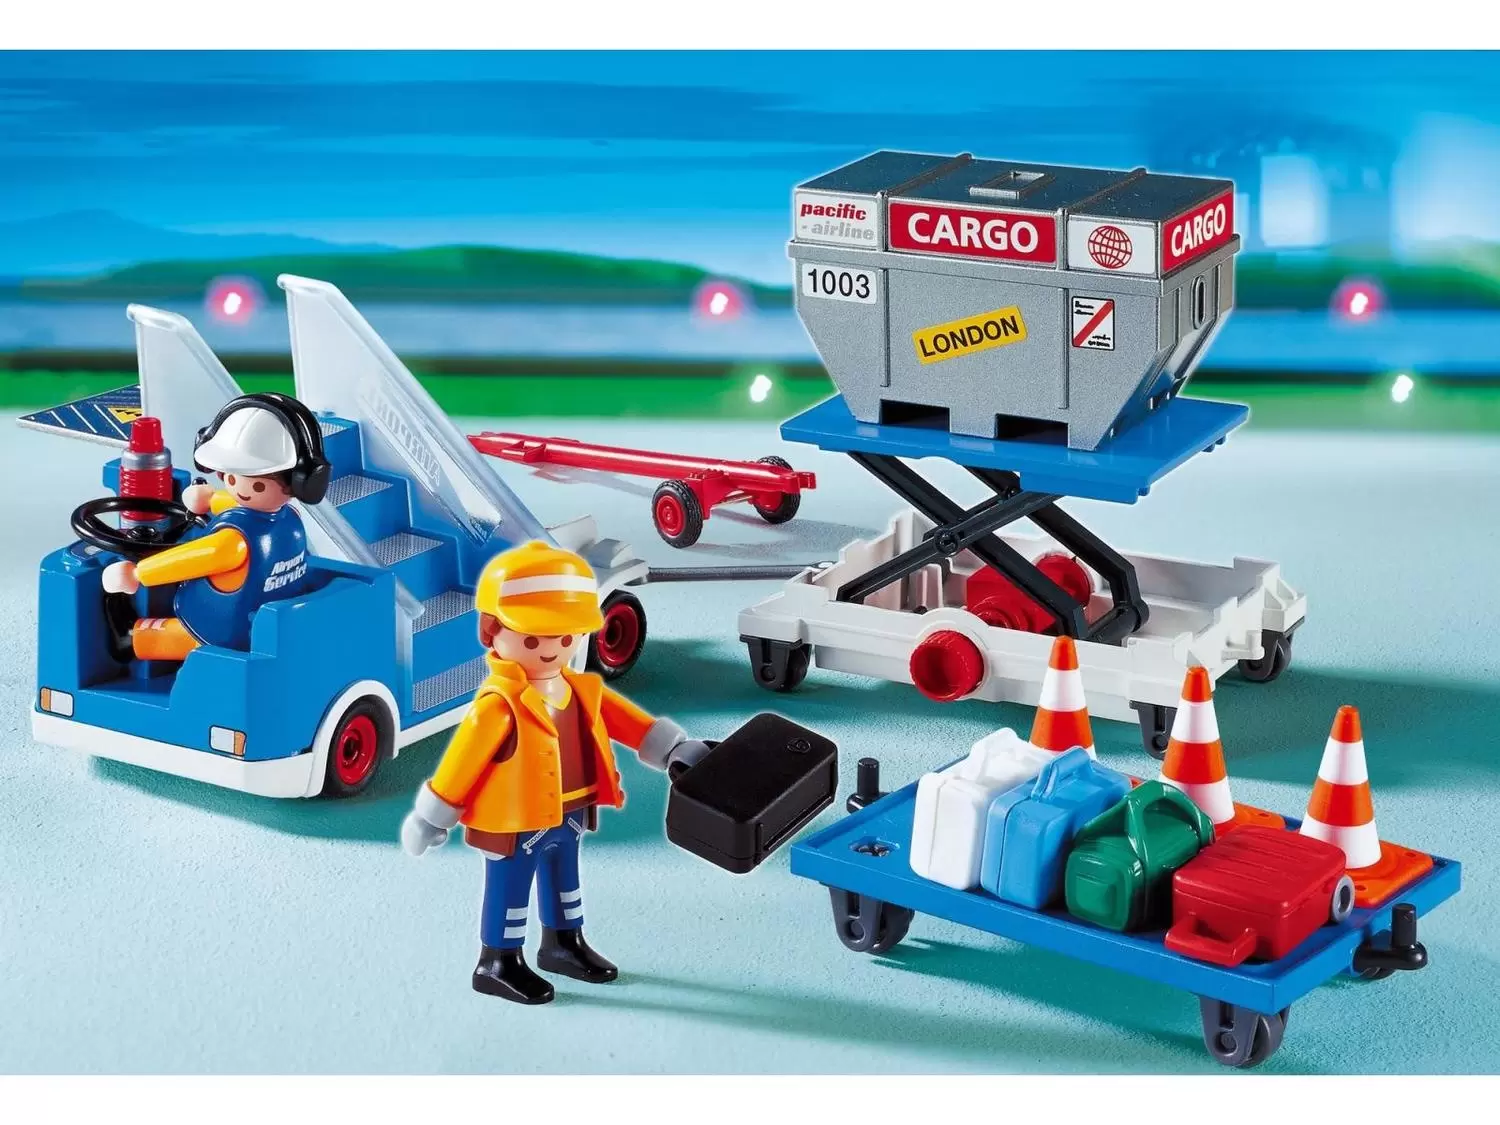 airport-undercarriage front cargo 4310 5261 c327 Playmobil 